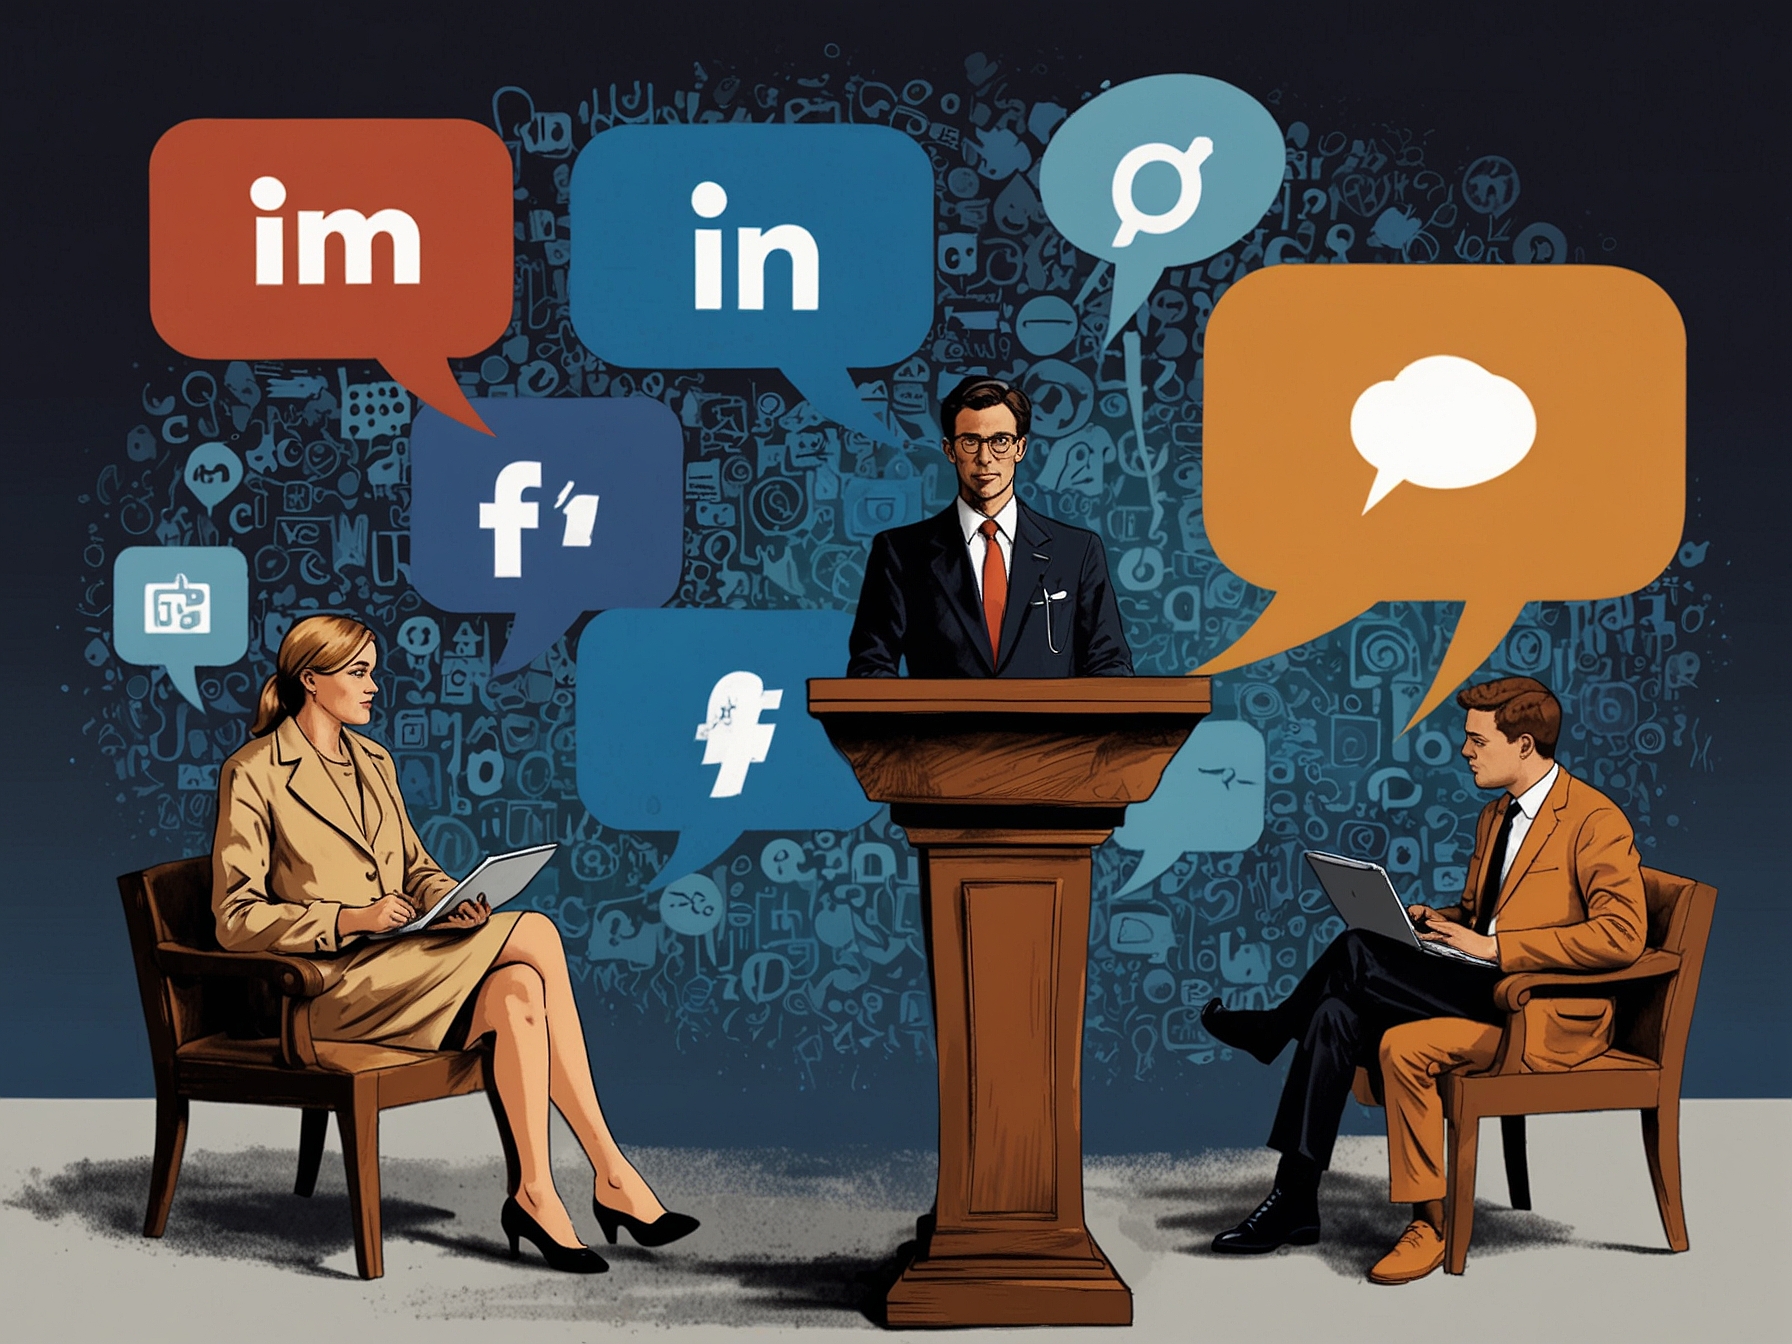 An illustration showing social media platforms with various speech bubbles, representing the debate on content moderation and government regulation spurred by recent state laws.